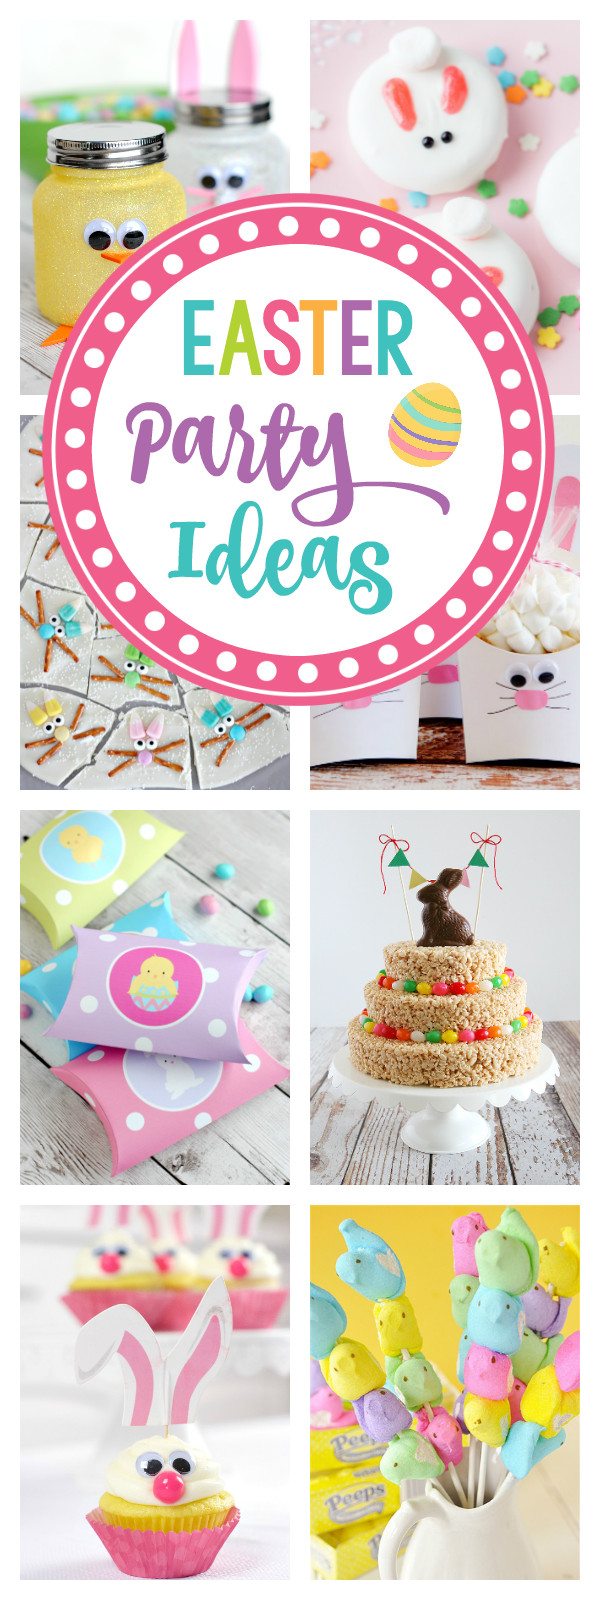 Easter Birthday Party Decorating Ideas
 25 Fun Easter Party Ideas for Kids – Fun Squared